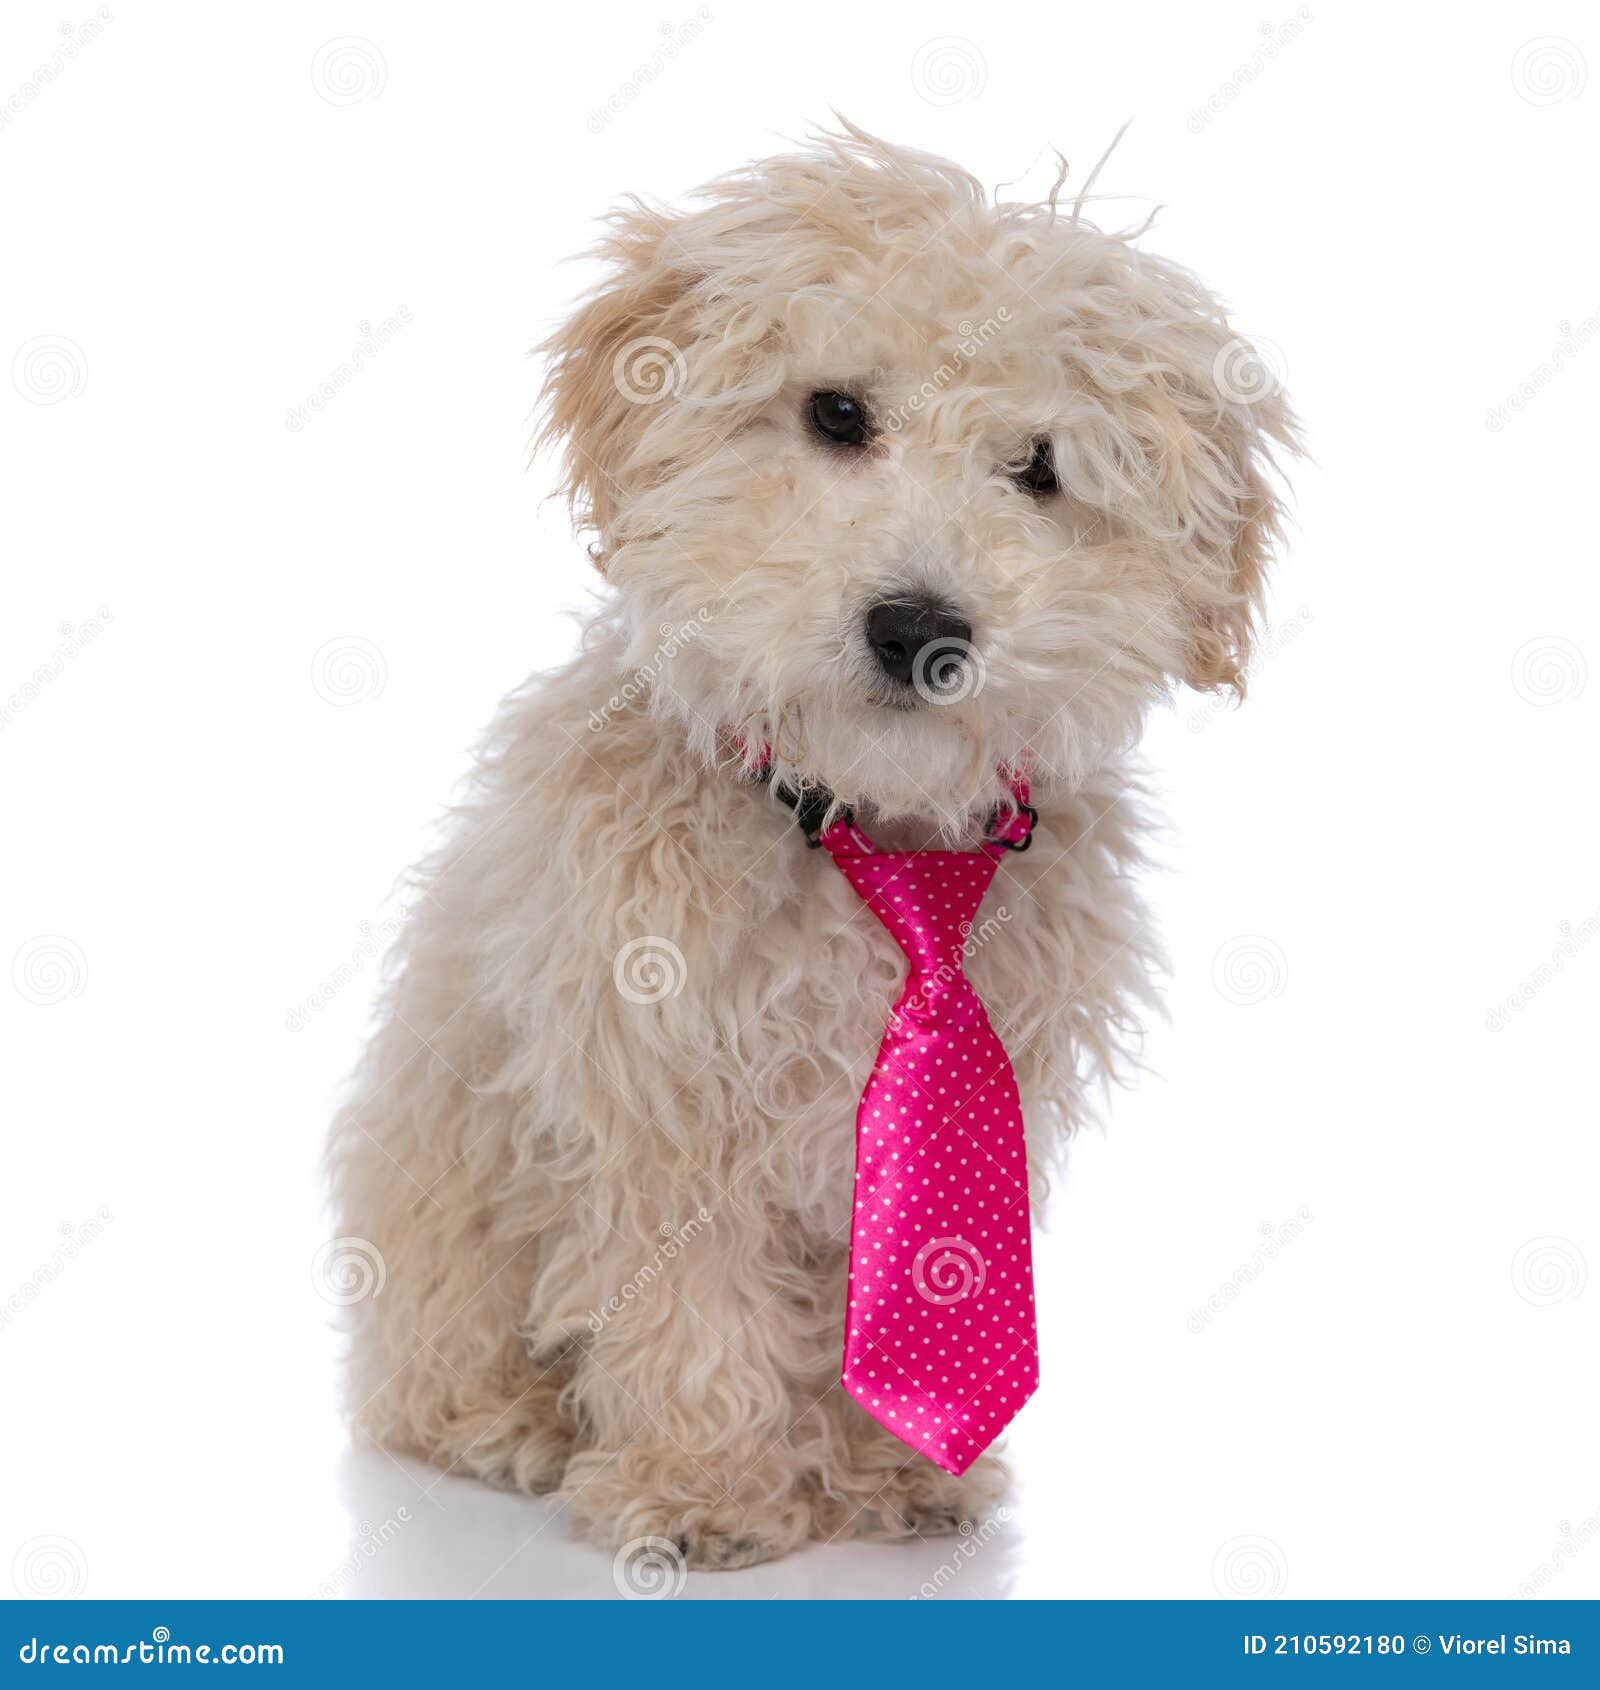 little caniche dog wearing a pink tie